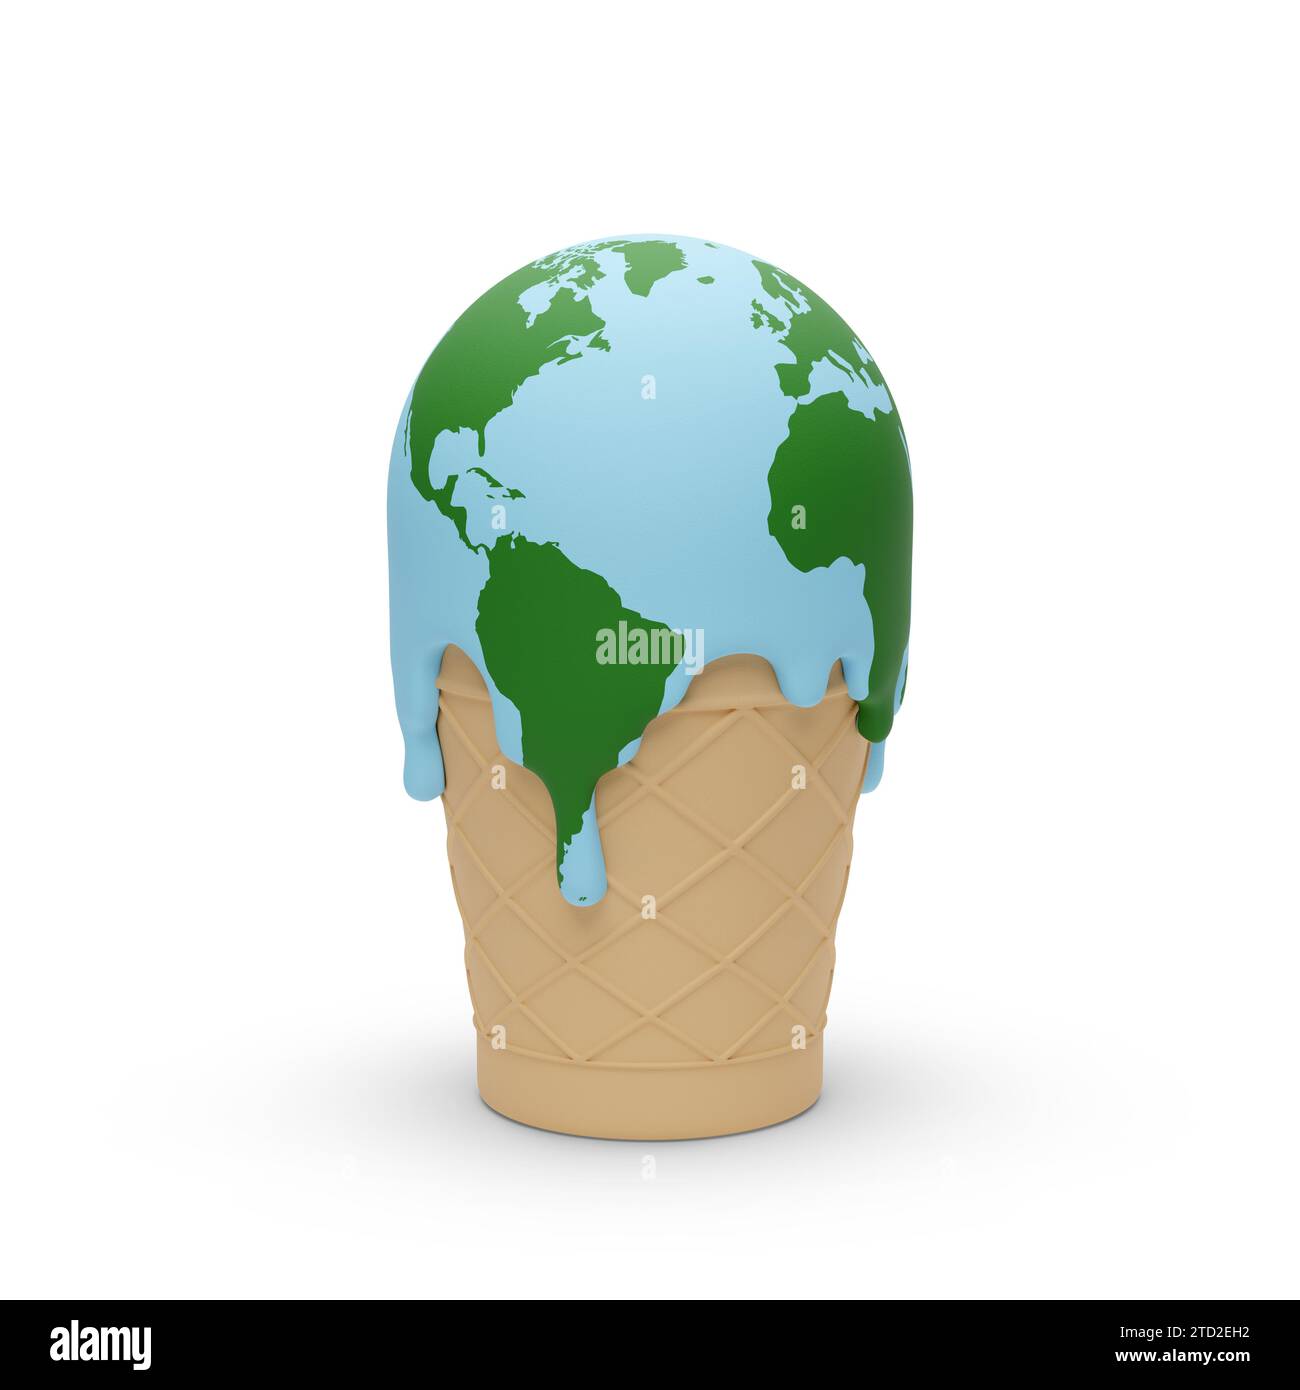 Ice cream melting in the shape of planet earth isolated on white background. Global warming concept. 3d illustration. Stock Photo